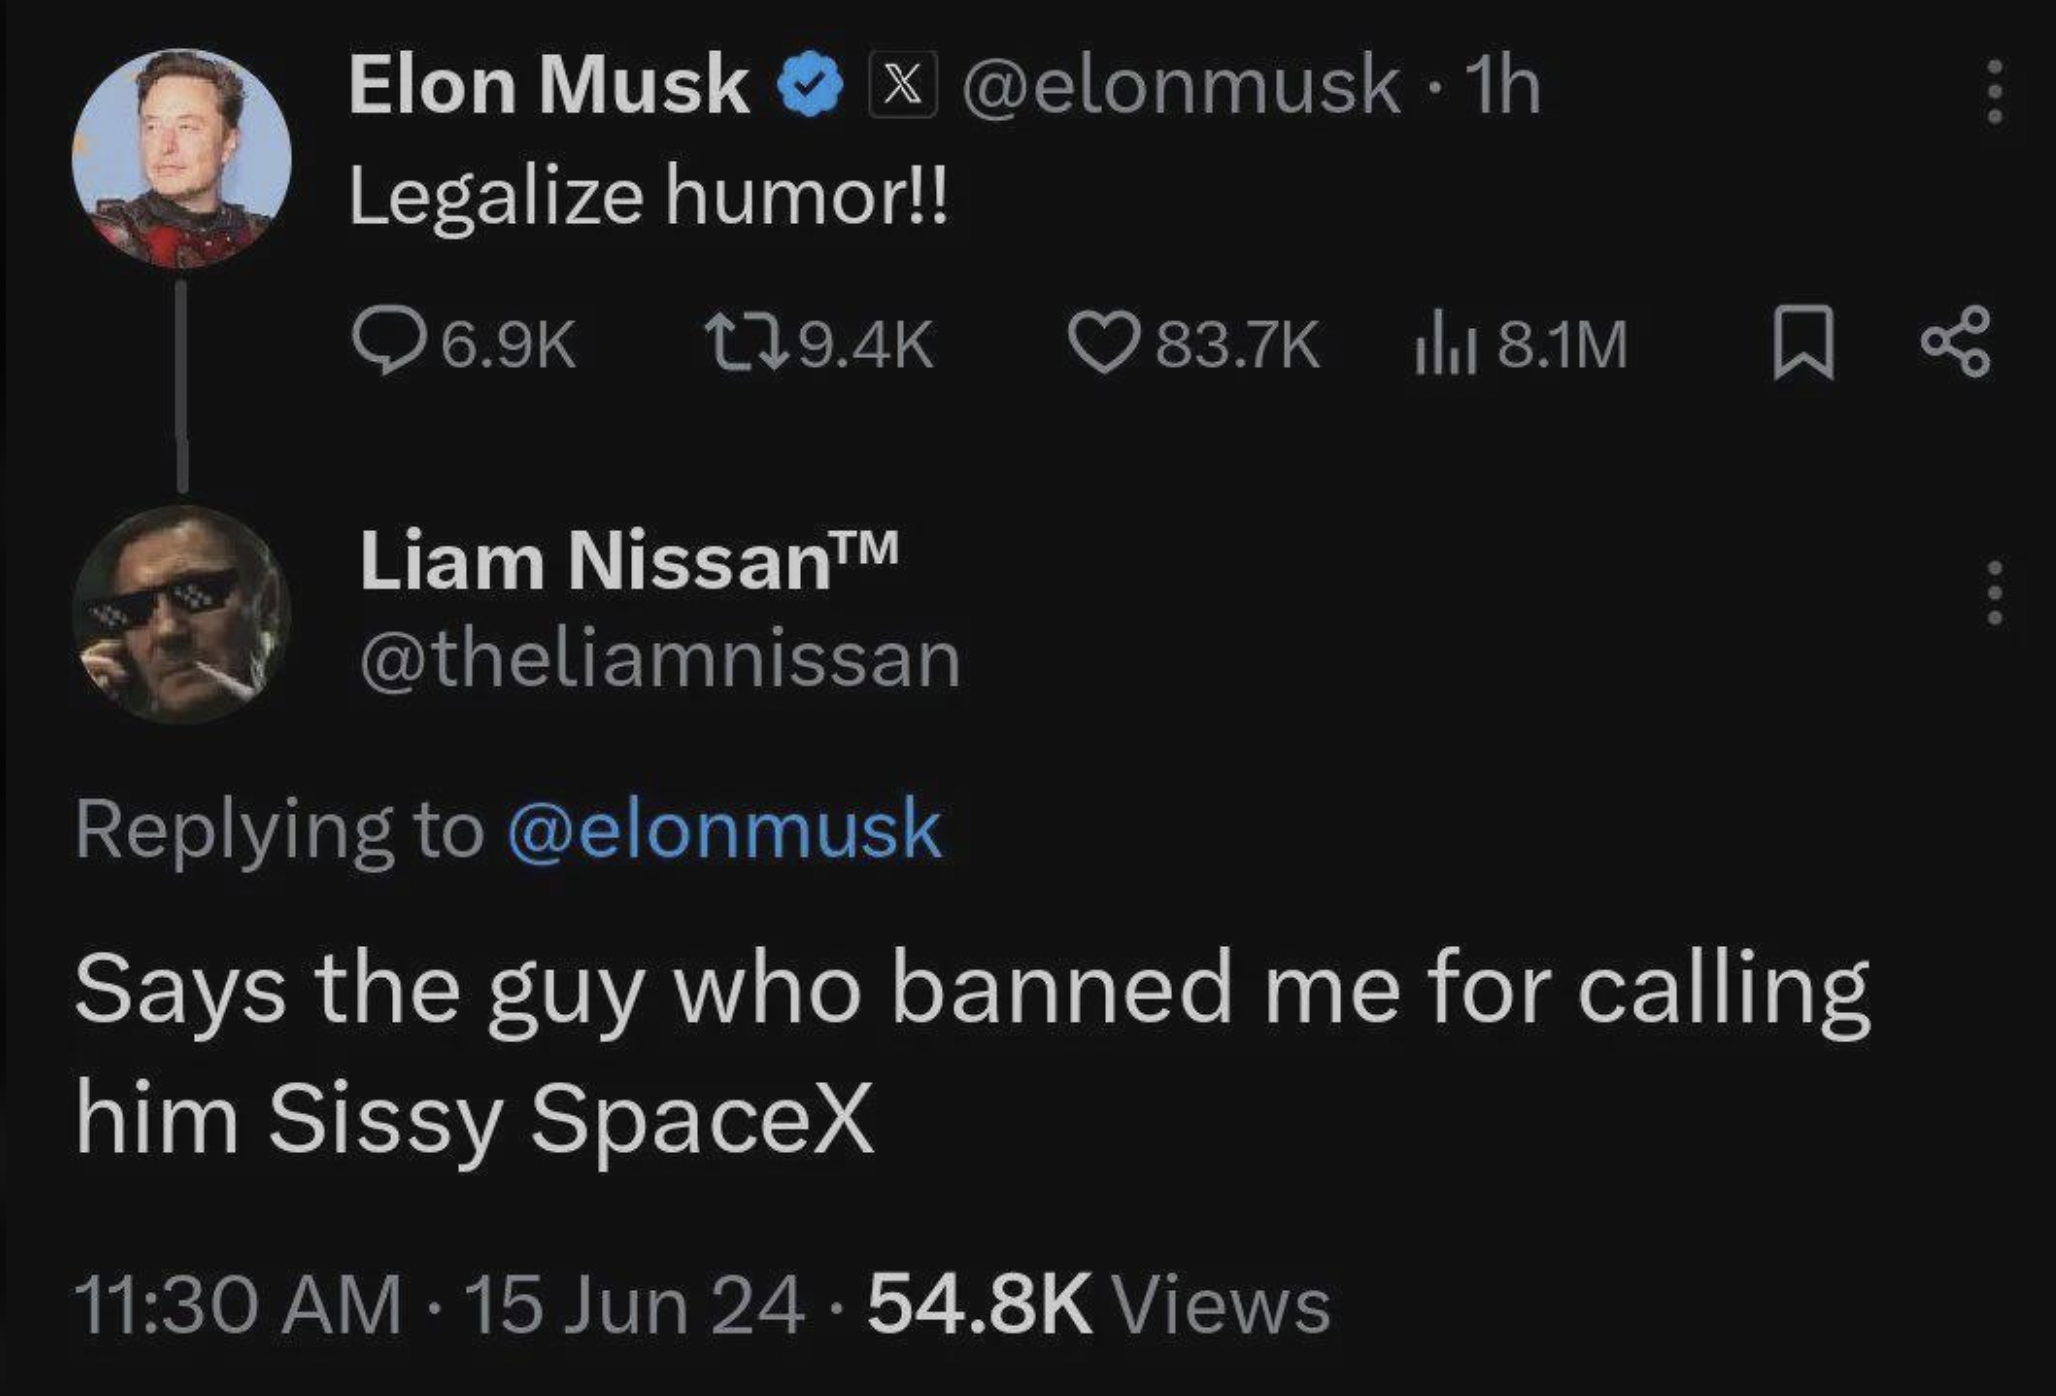 elon musk legalize humor - Elon Musk x 1h Legalize humor!! Q 8.1M Liam Nissan Says the guy who banned me for calling him Sissy SpaceX 15 Jun 24. Views